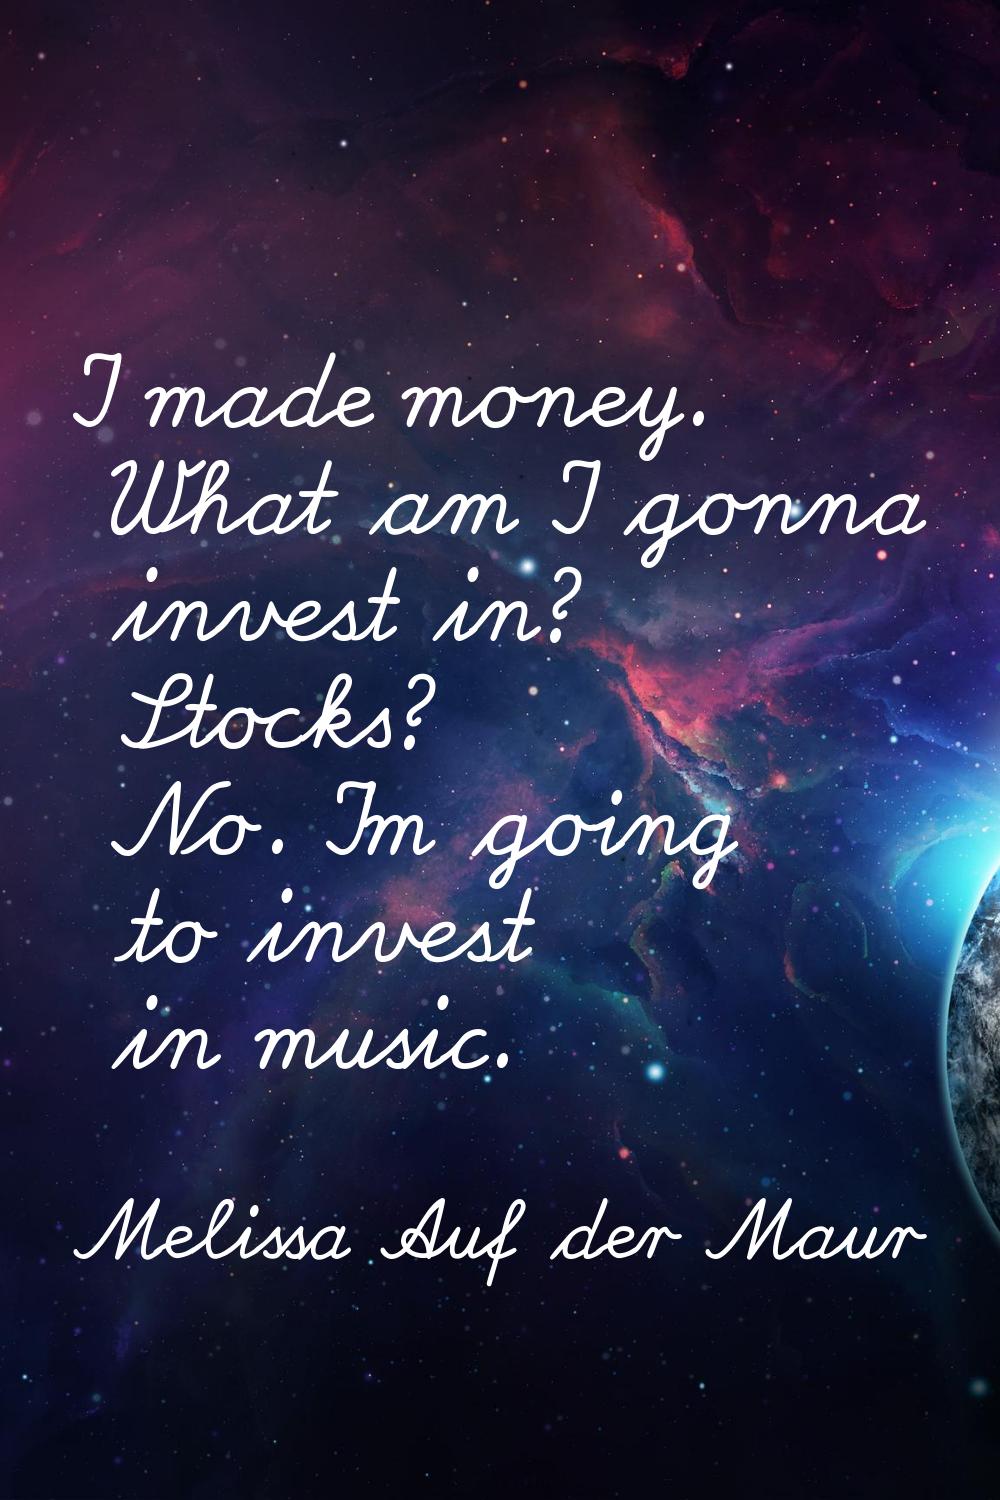 I made money. What am I gonna invest in? Stocks? No. I'm going to invest in music.